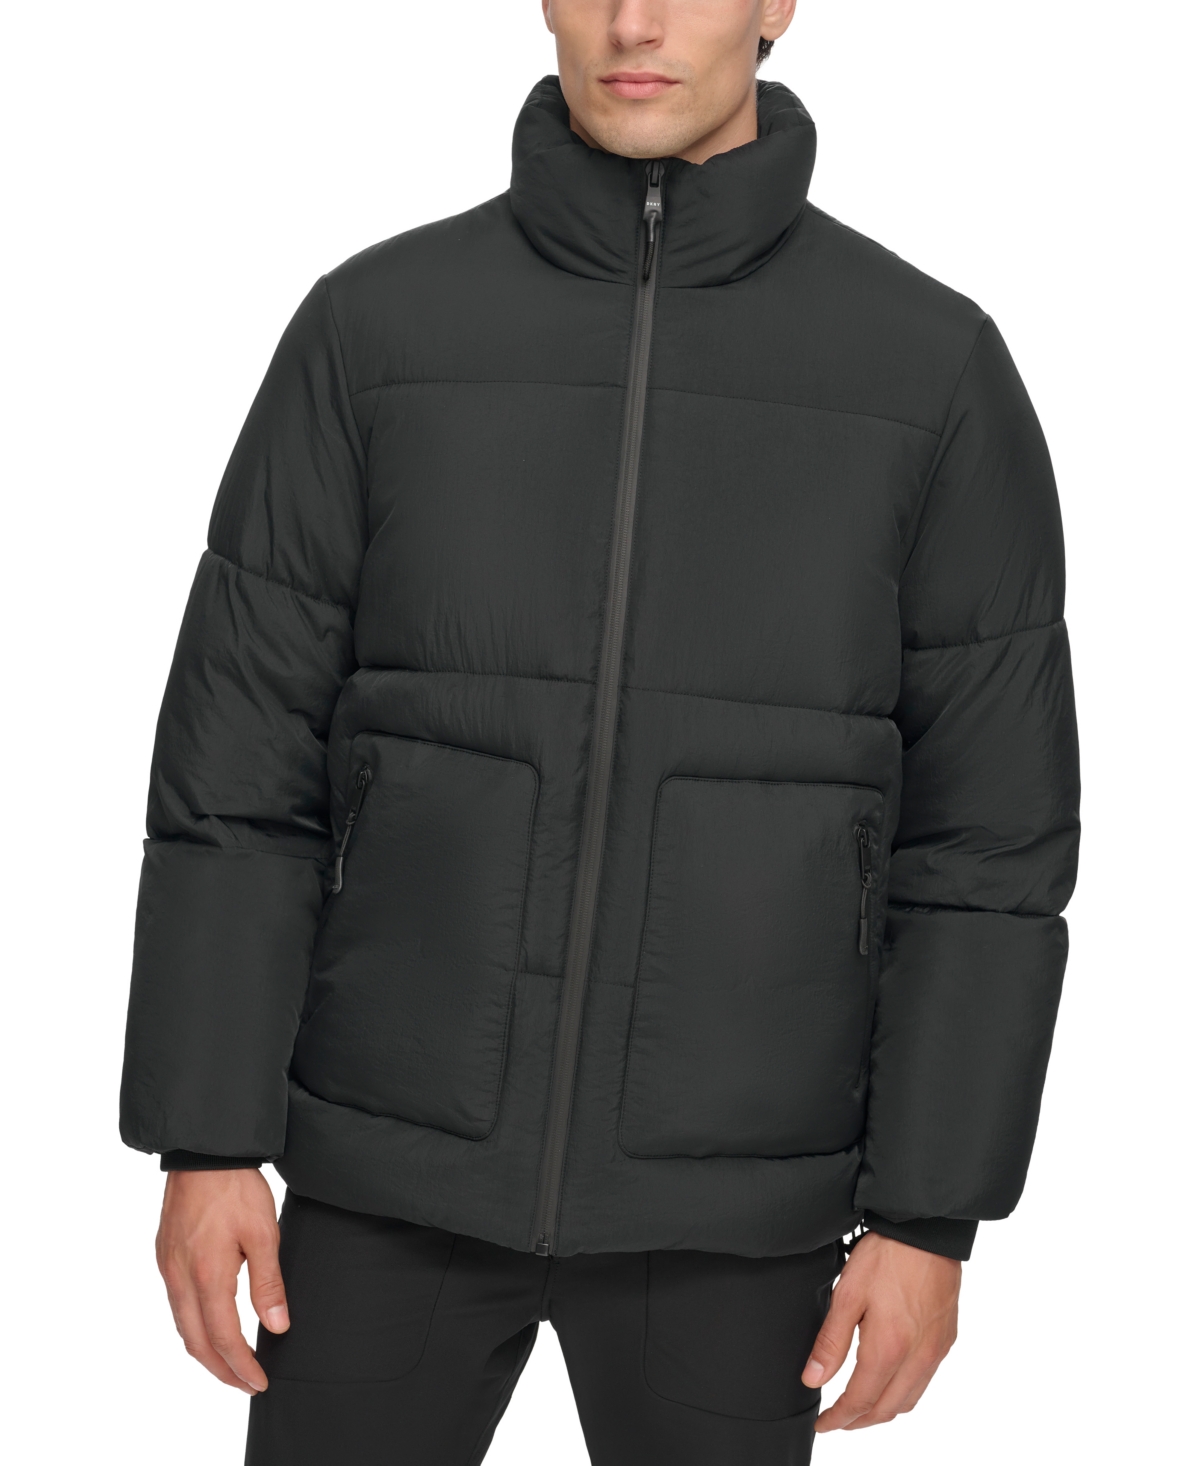 Dkny Men's Refined Quilted Full-zip Stand Collar Puffer Jacket In Black